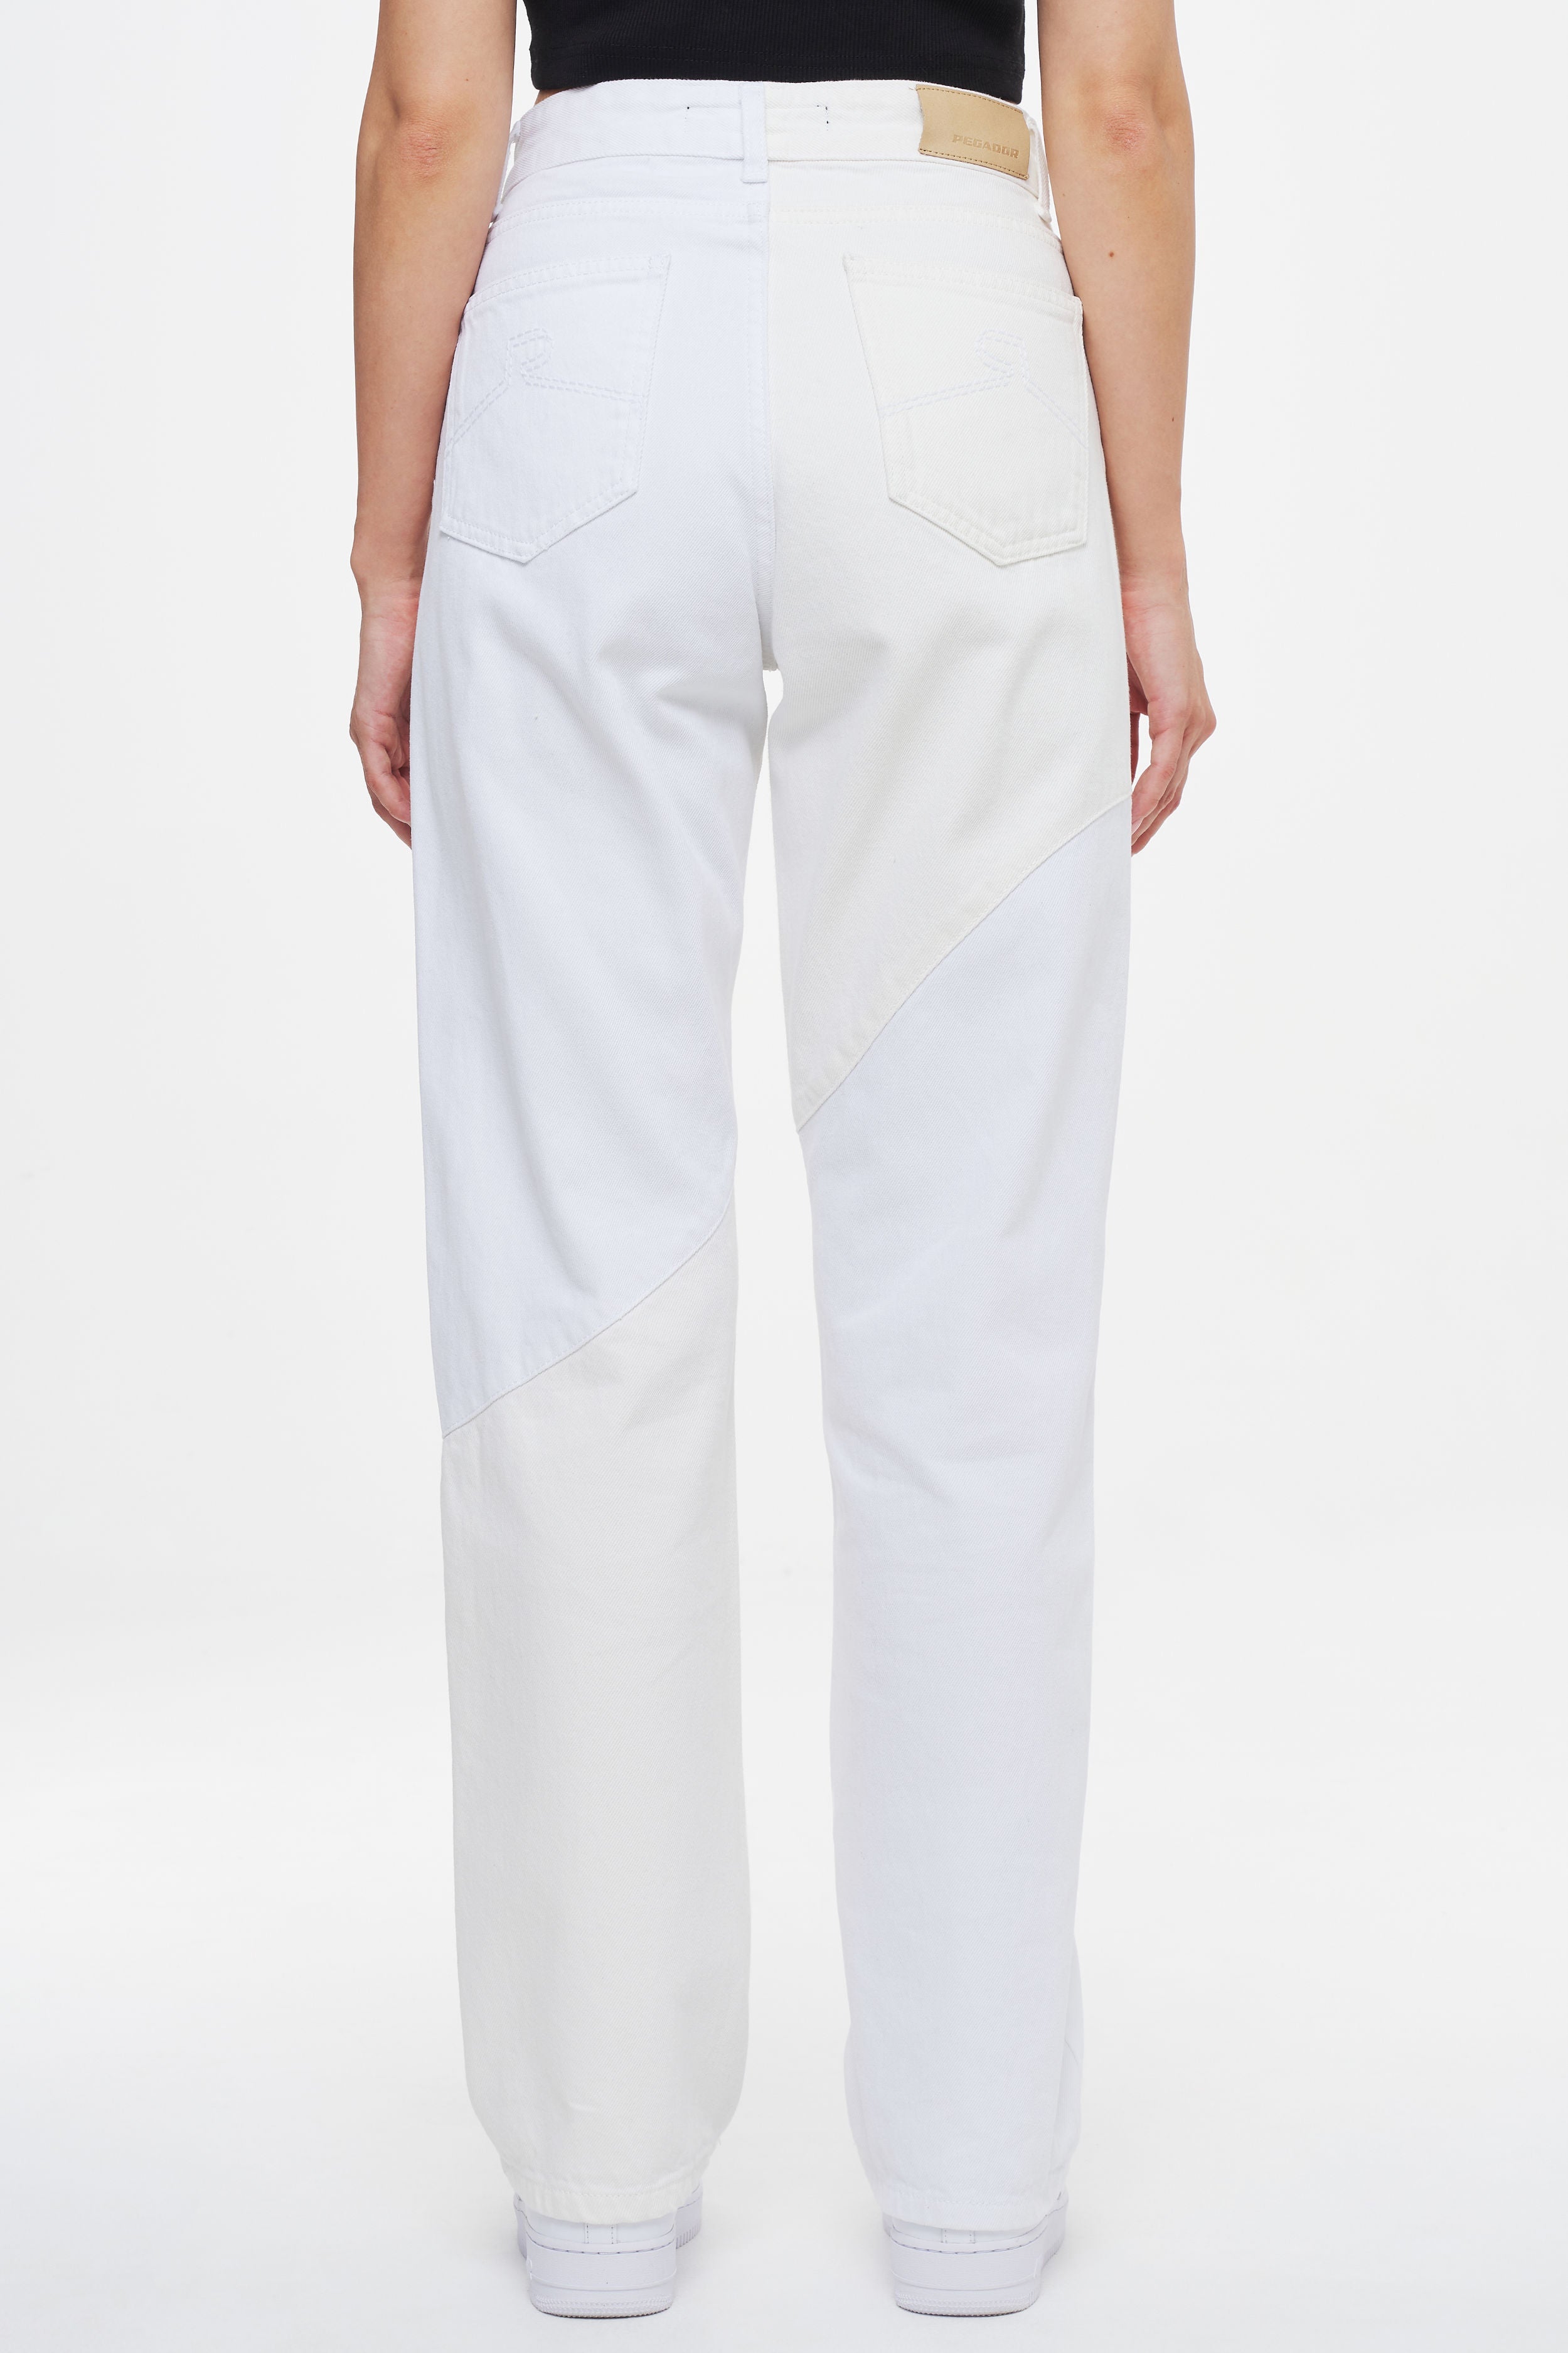 Lid Two Tone Wide Jeans Washed Pearl White Jeans | Woman Ahead of Time Female 